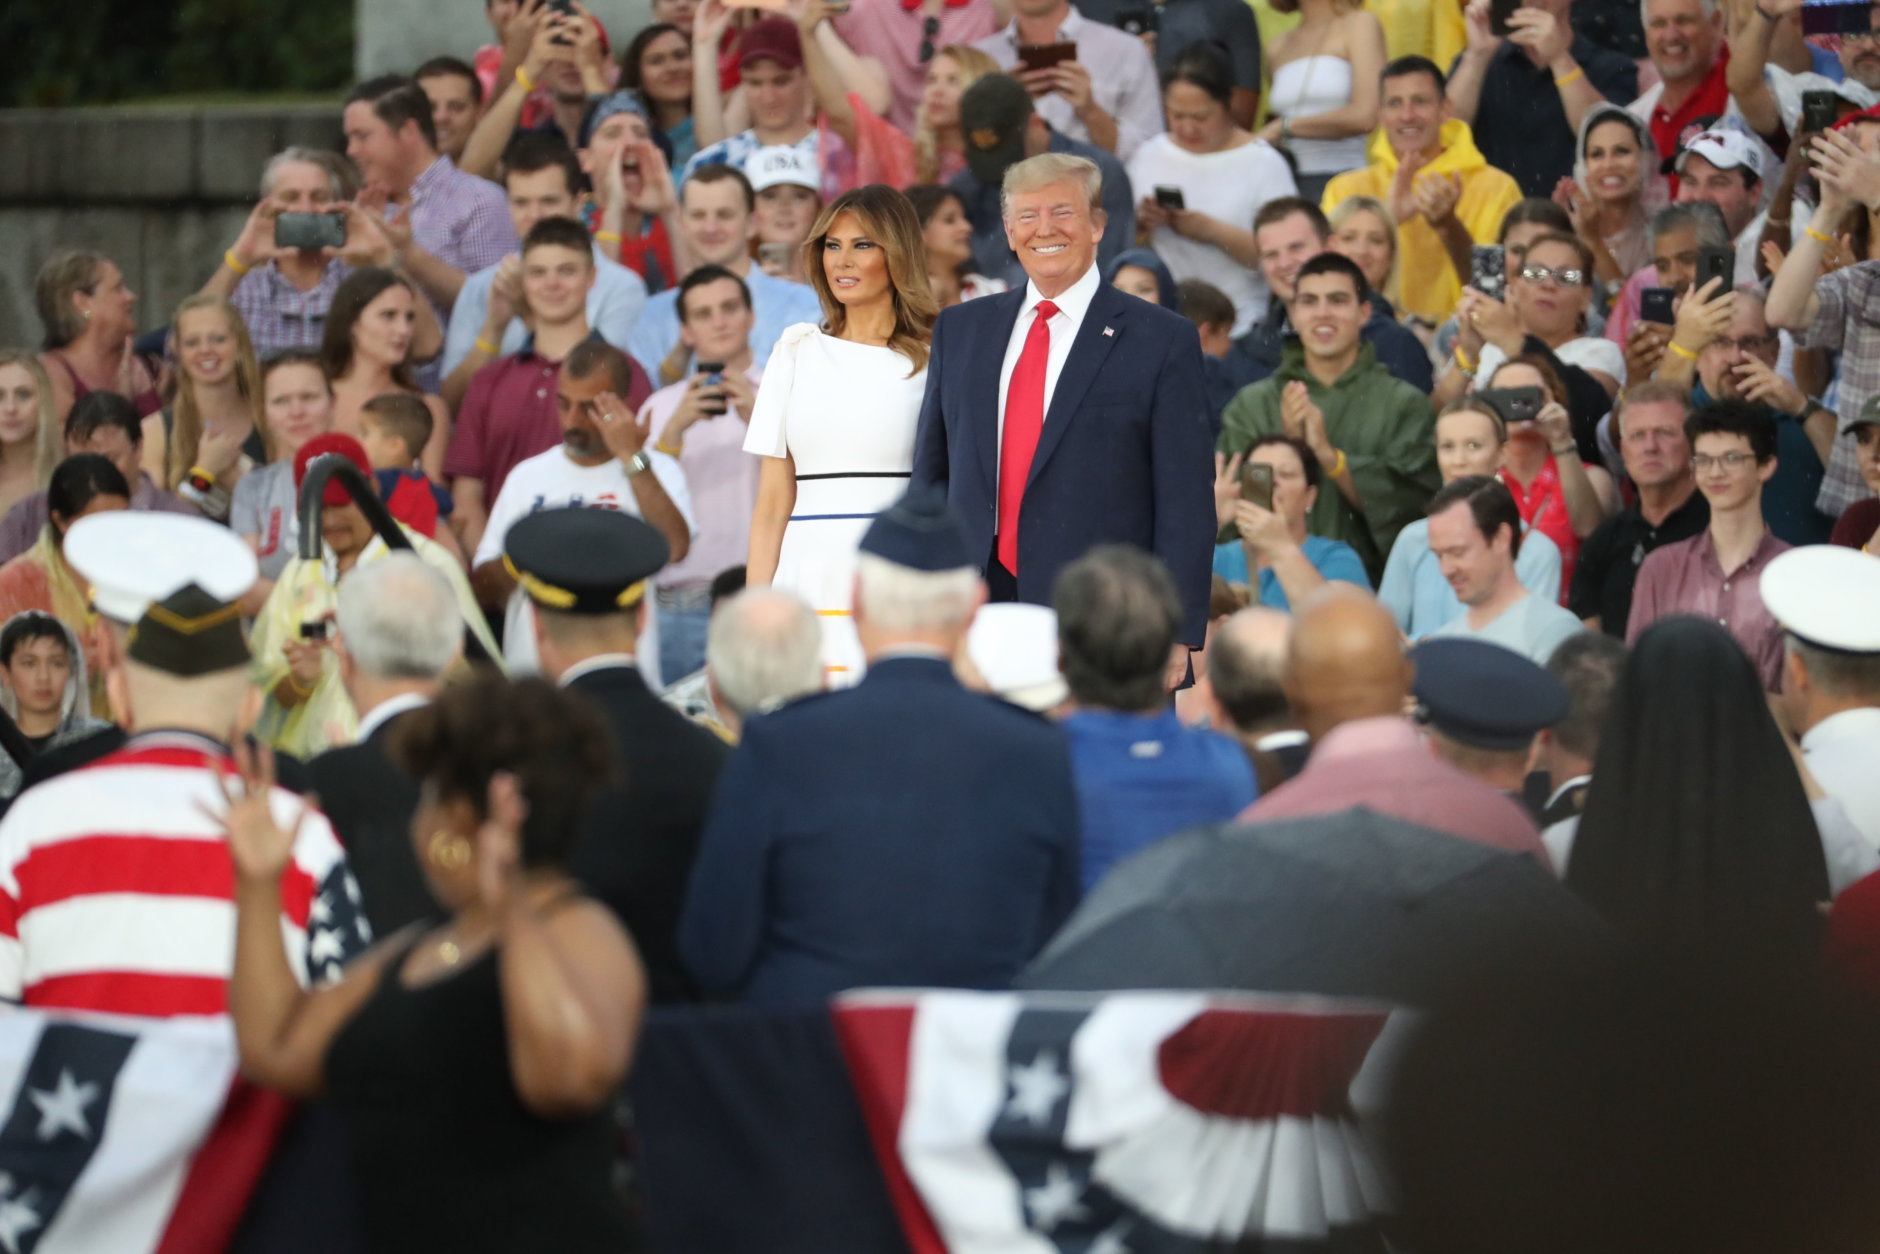 President Donald Trump and first lady Melania Trump, arrives speaks to an Independence Day celebration in front of the Lincoln Memorial in Washington, Thursday, July 4, 2019. (AP Photo/Andrew Harnik)